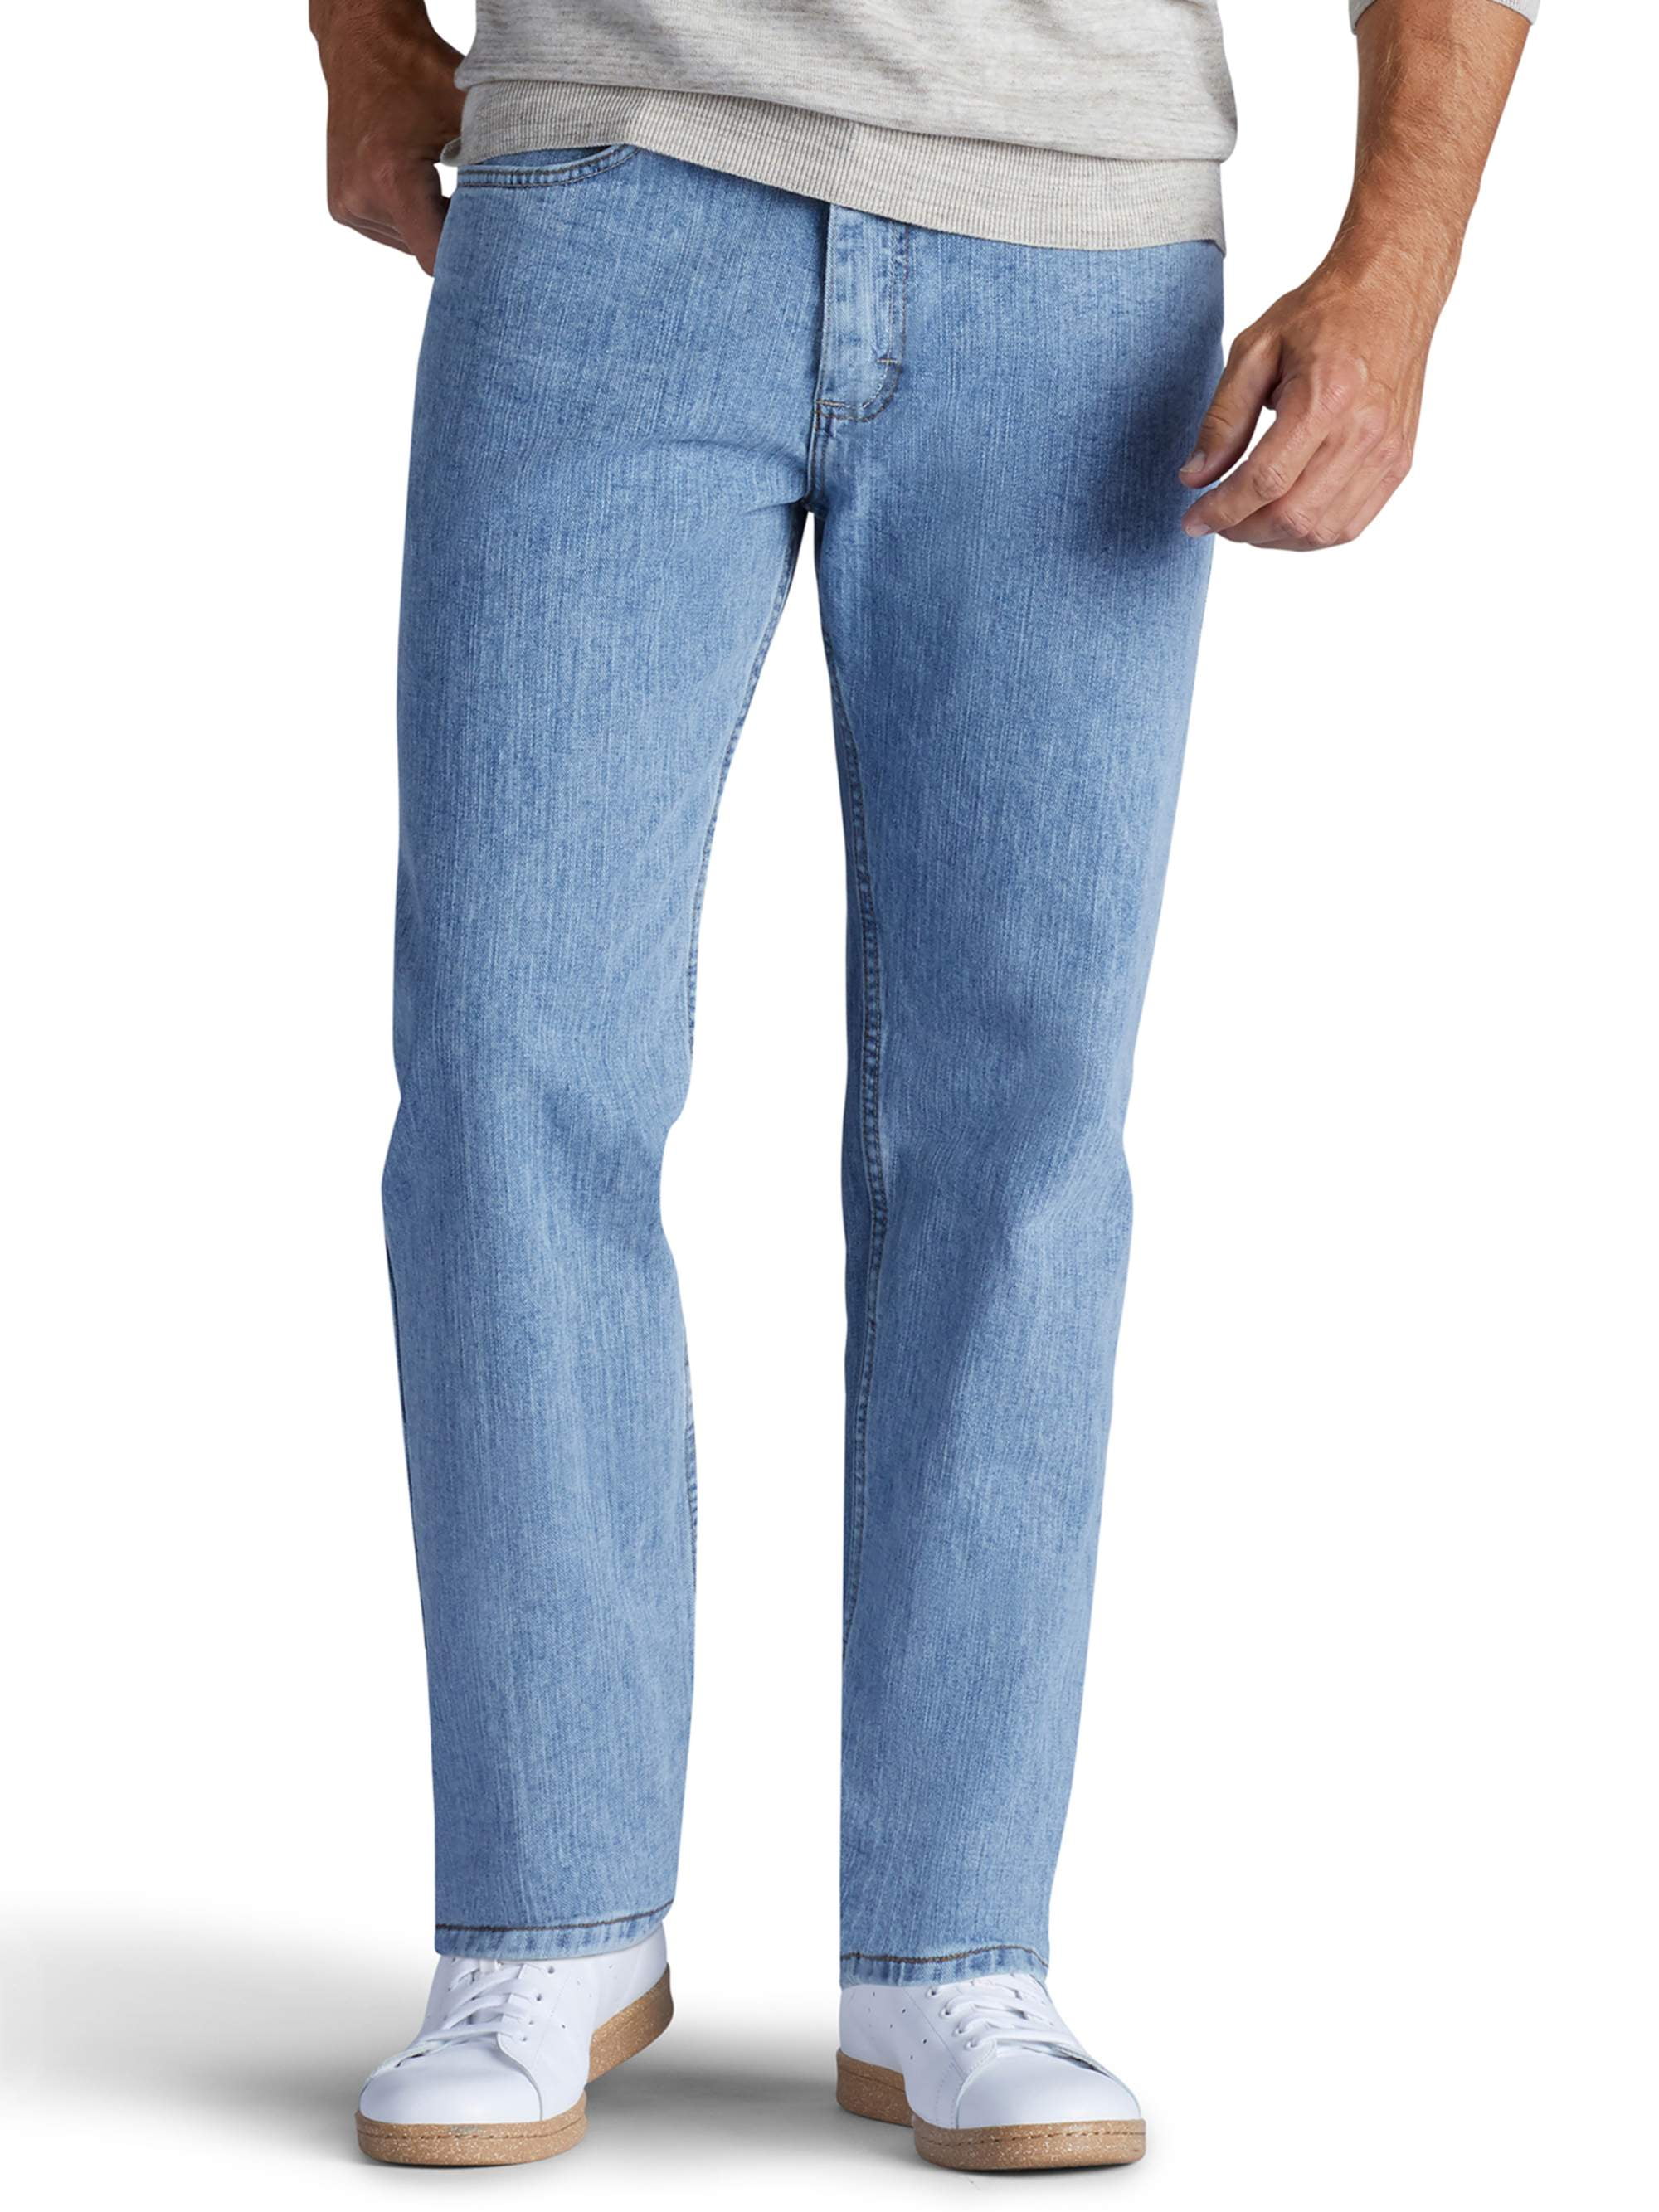 Lee Men's Relaxed Fit Straight Leg Jeans 